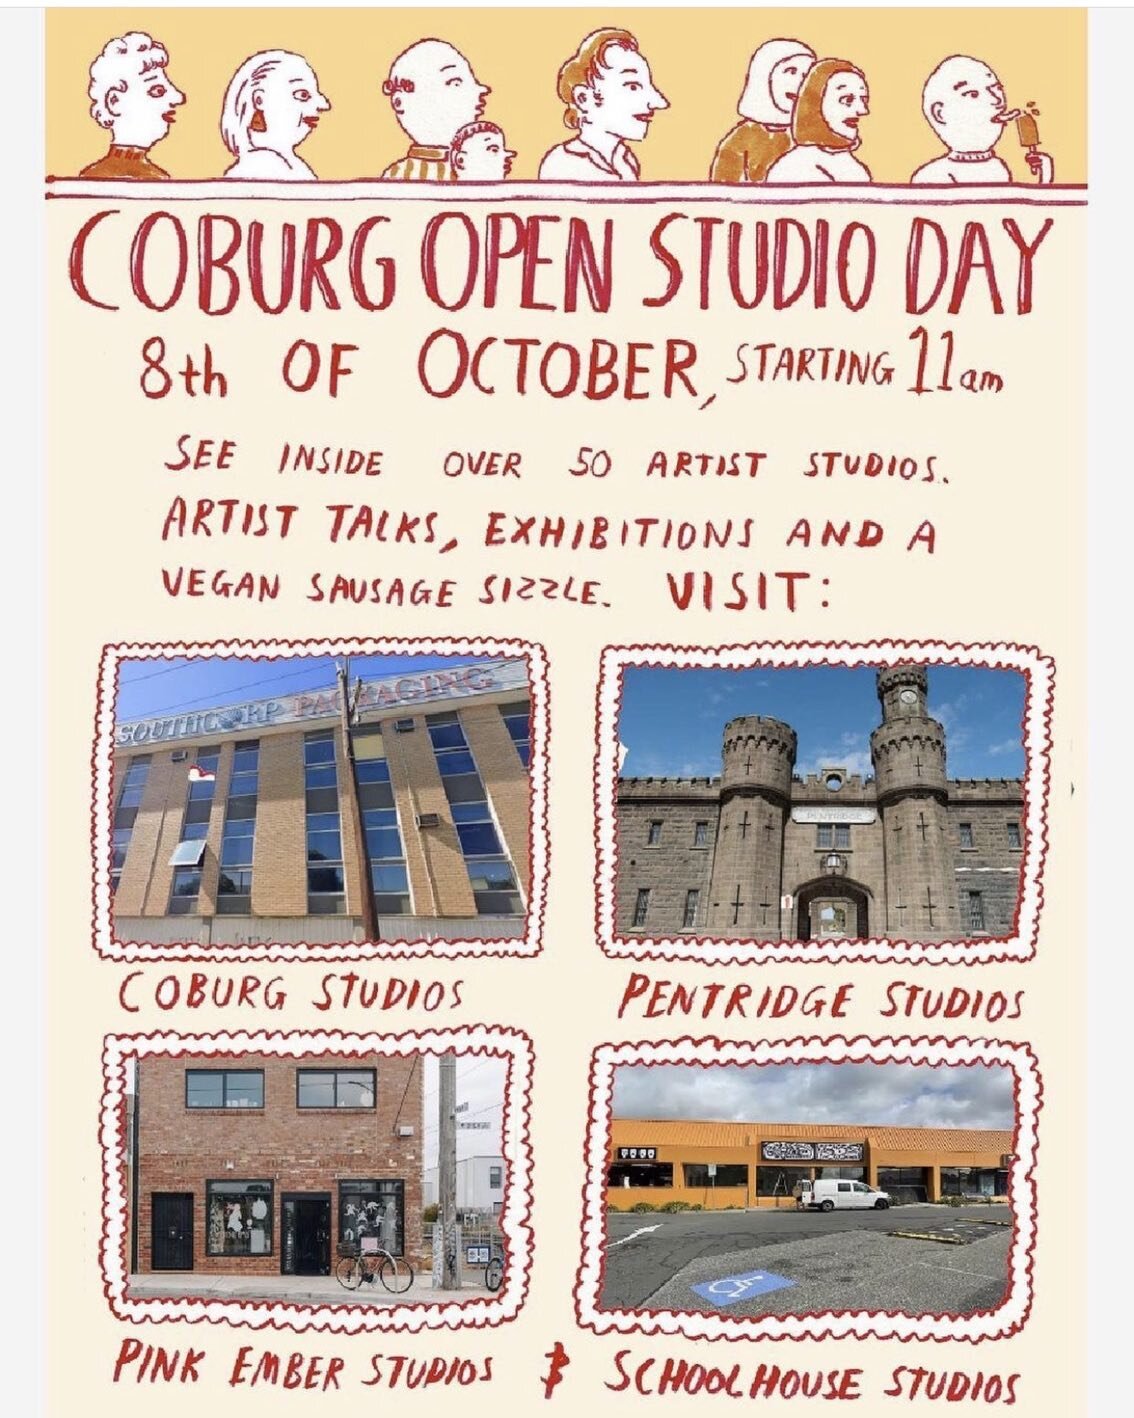 If you are in the vicinity come to the Coburg studios open day on Saturday 8th October. Four different studios to visit and lots of artists to chat to including myself and @doylee_art. @coburgstudios